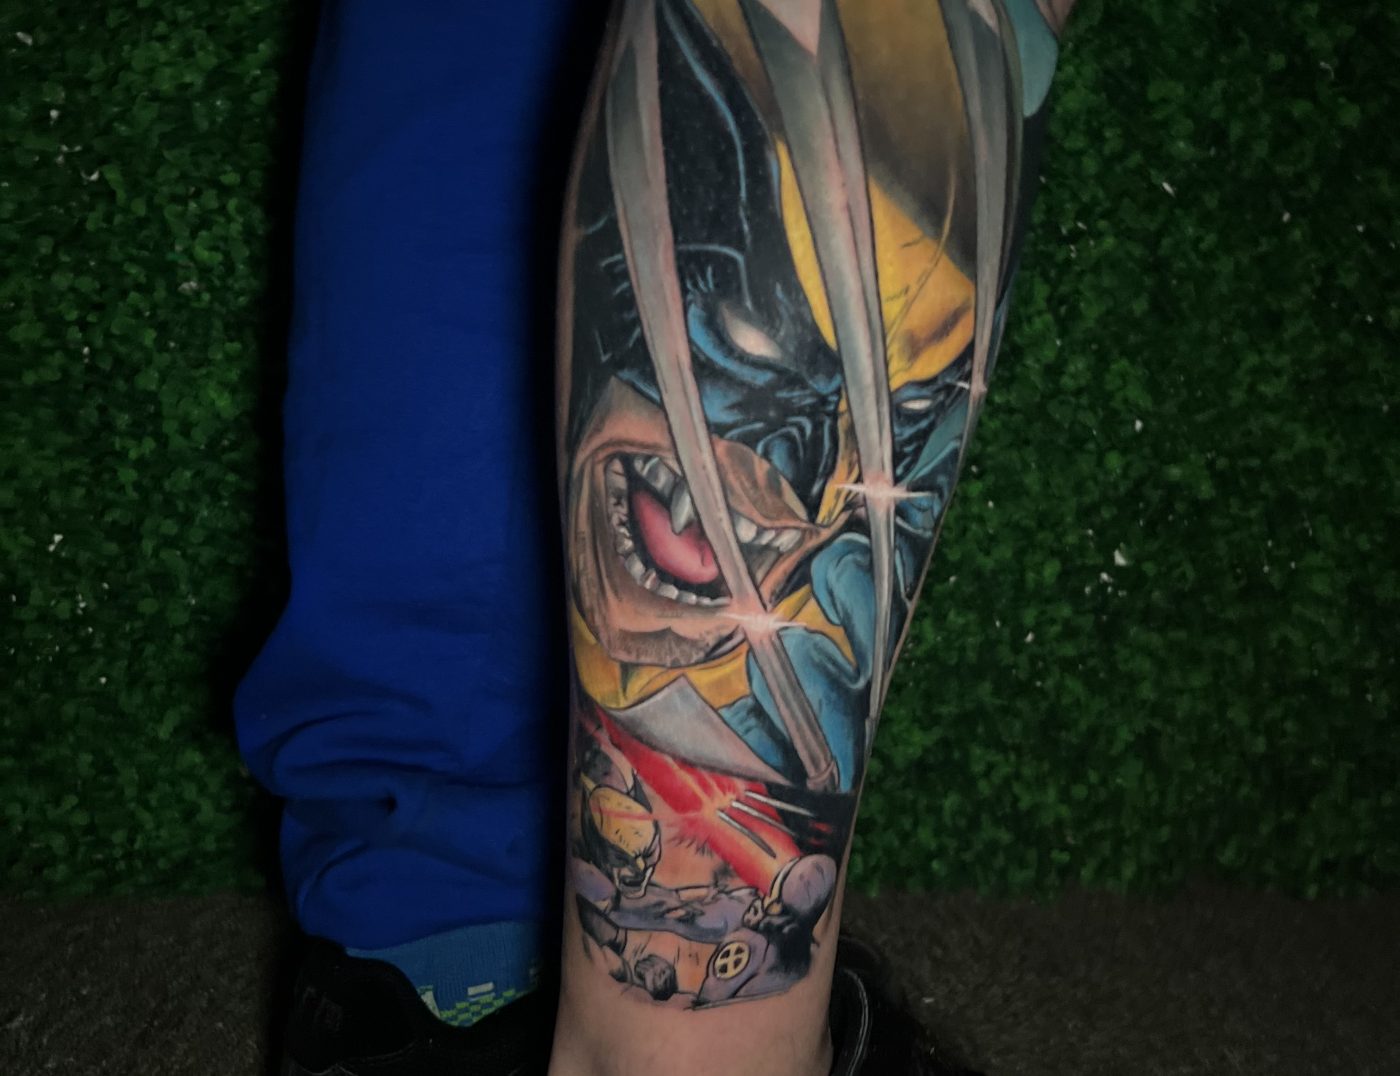 Wolverine X-Men Anime Tattoo By DB Wyte. DB Wyte is a tattoo artist at Iron Palm Tattoos. James Howlett, AKA Logan, AKA Wolverine is a world famous fixational character in the X-Men comic universe by Marvel. The member of the X-Men symbolizes strength, rejuvenation, and fearlessness to many. Irregardless we love it because Anime tattoos always look cool.